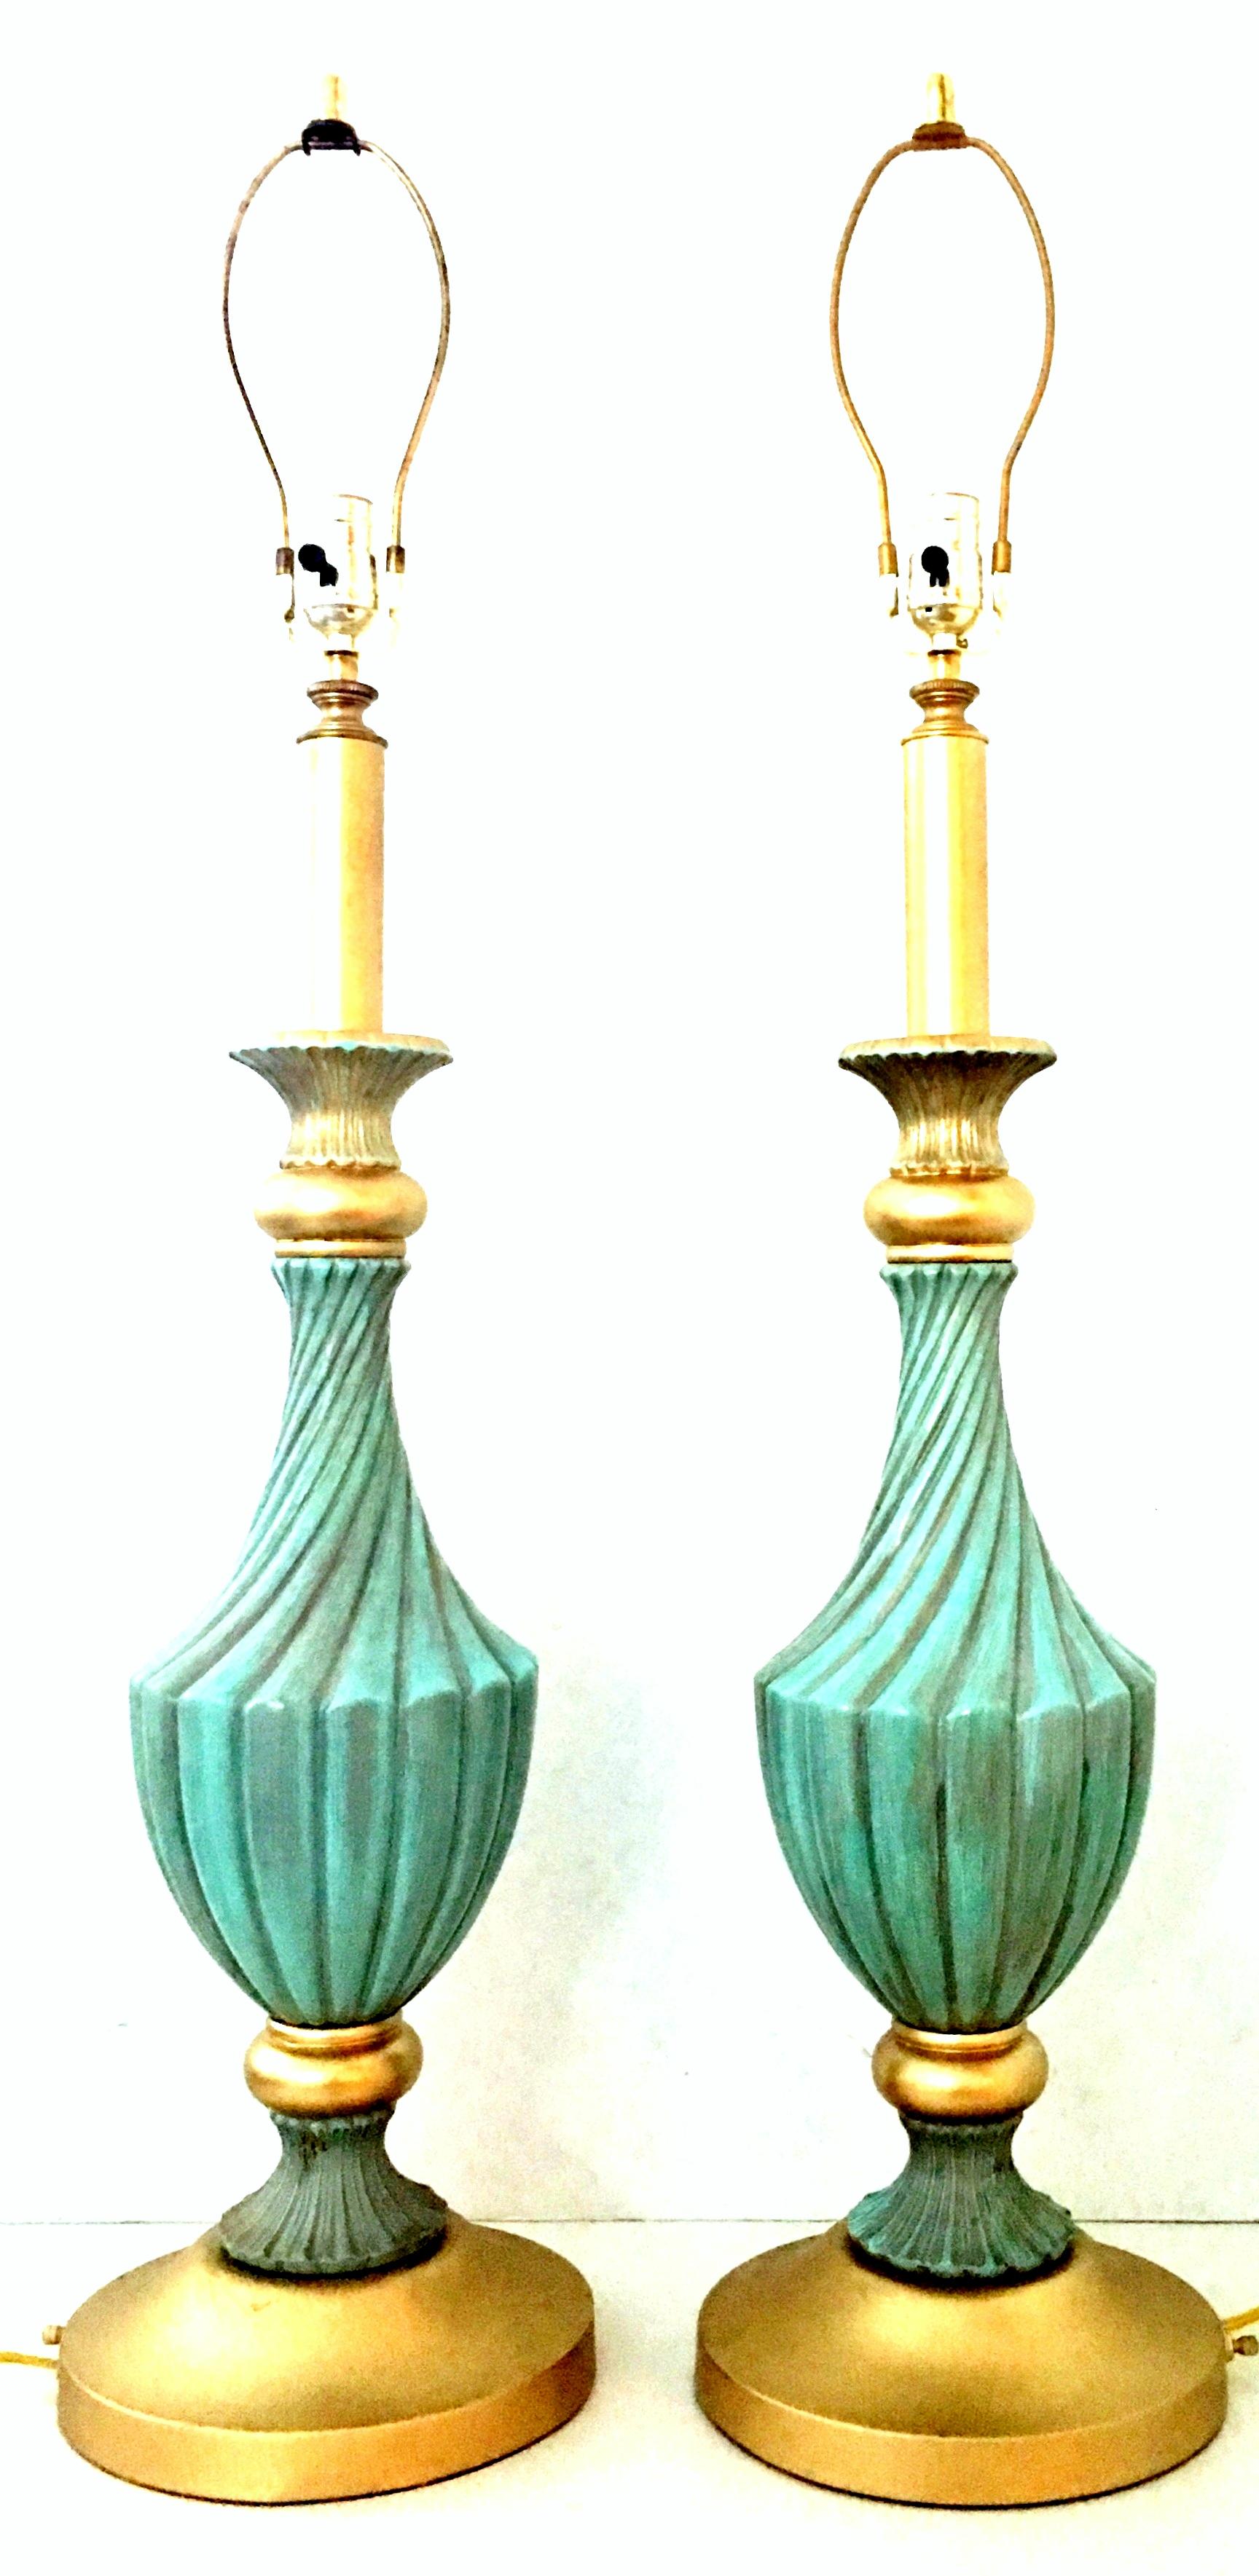 American 20th Century Pair of Neoclassical Style Ceramic & Brass Lamps by, Stiffel For Sale